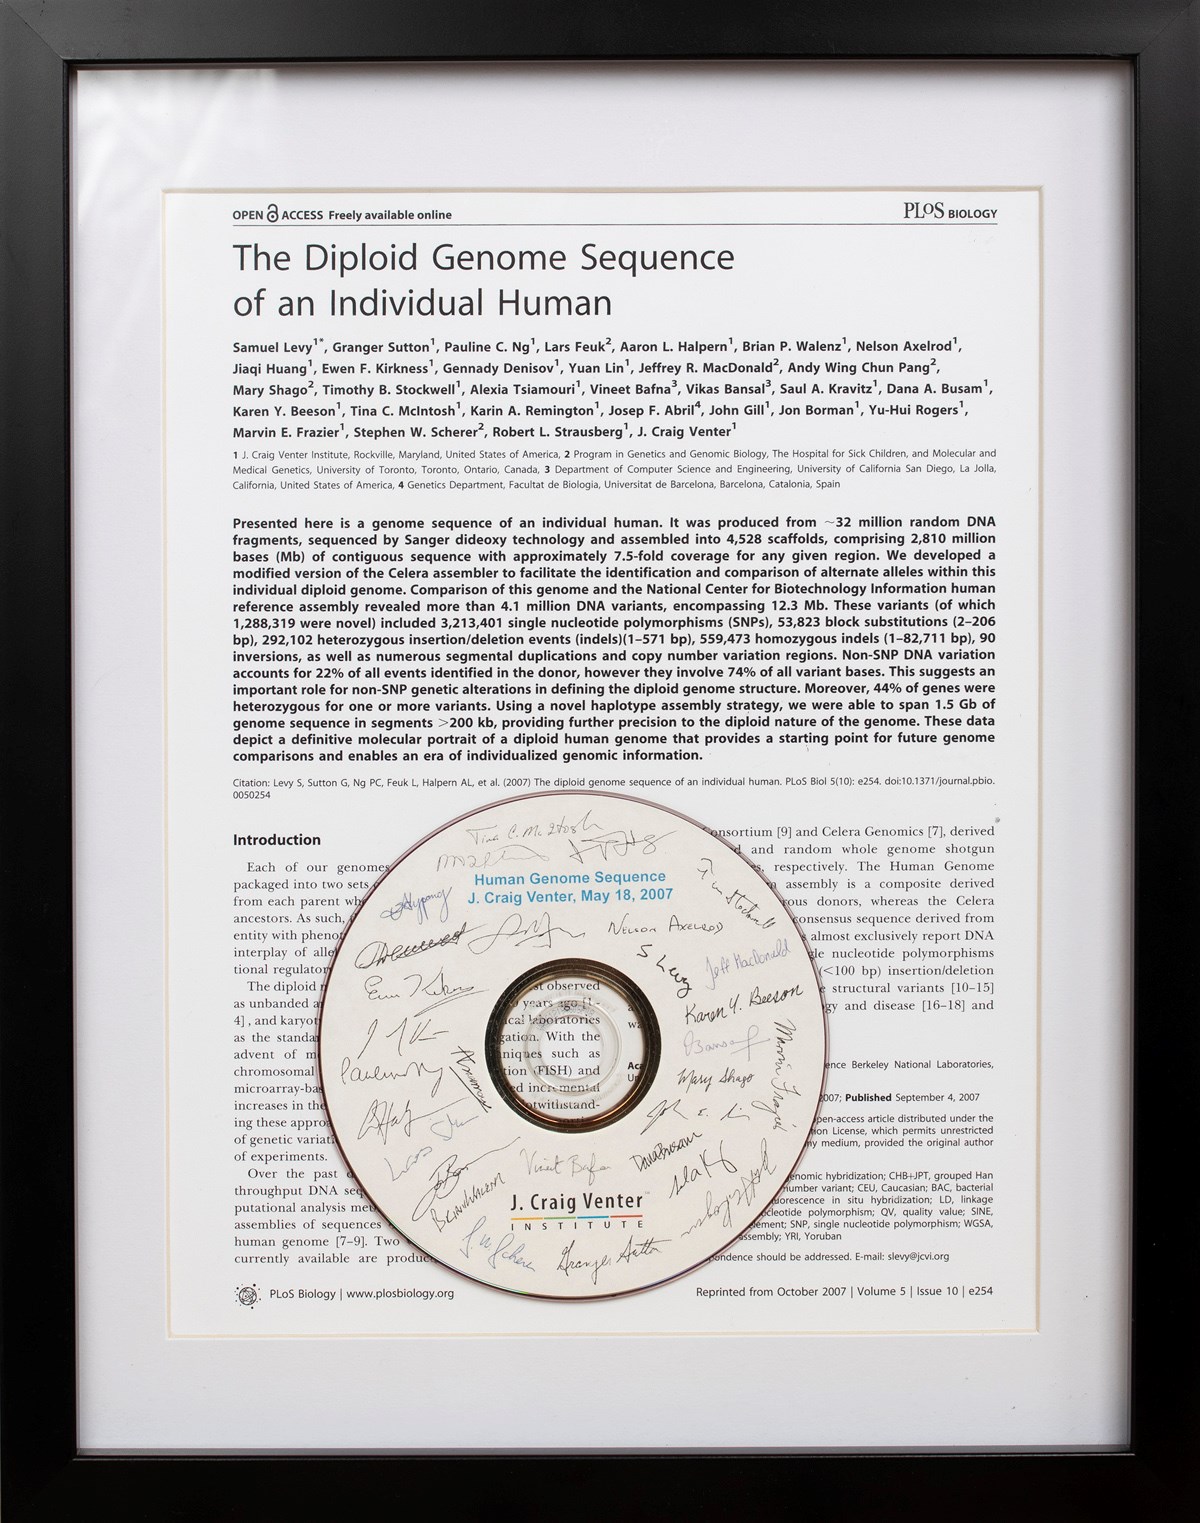 A framed copy of the first page of the publication "The Diploid Genome Sequence of an Individual Human". Inside the frame, there is also a CD that reads "Human Genome Sequence, J. Craig Venter, May 18, 2007". The CD is signed by many individuals.